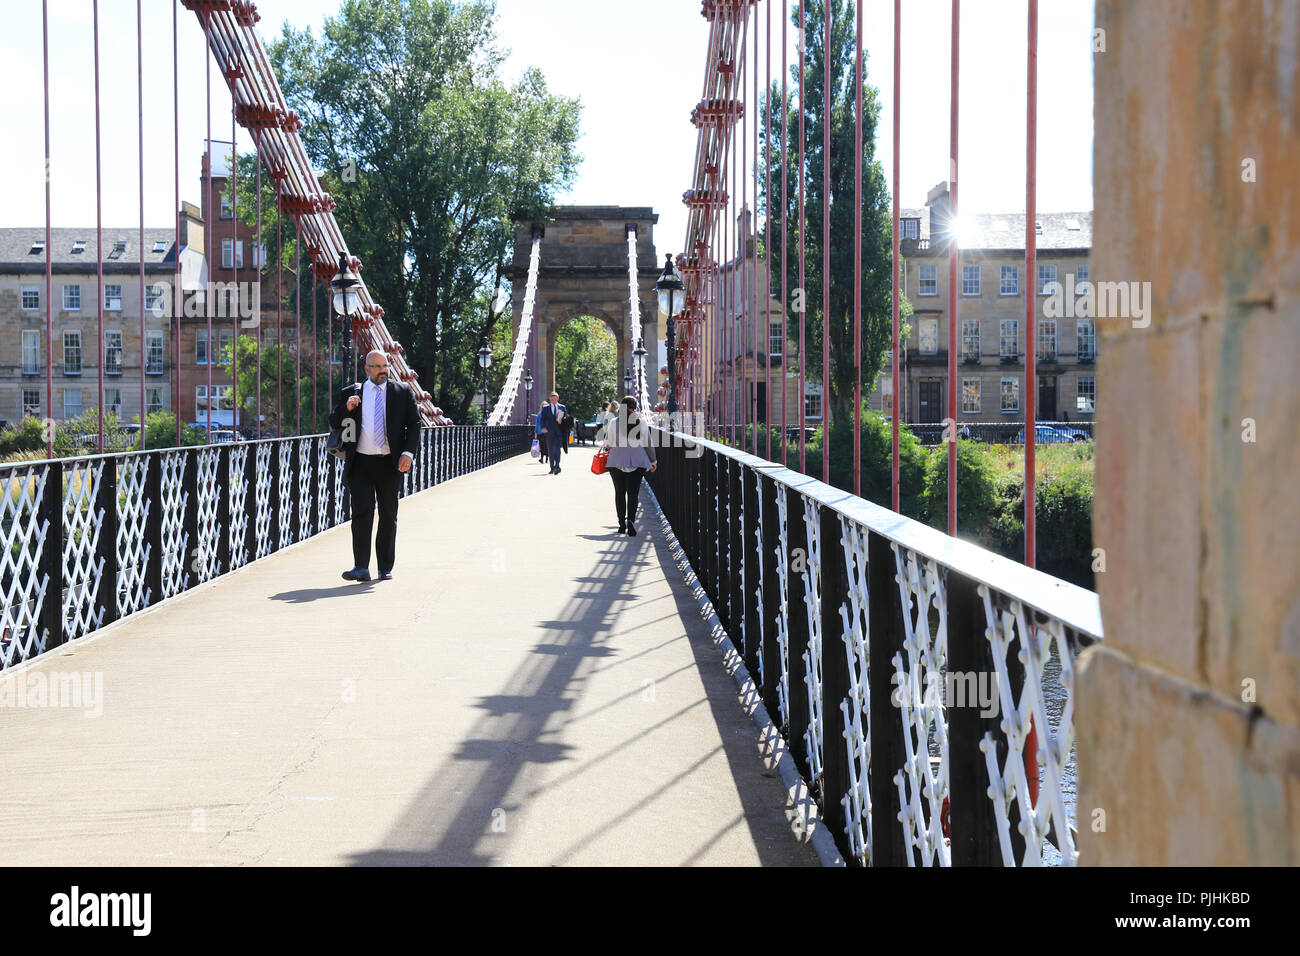 South Portland Street suspension footbridge across the River Clyde, in Glasgow, UK Stock Photo